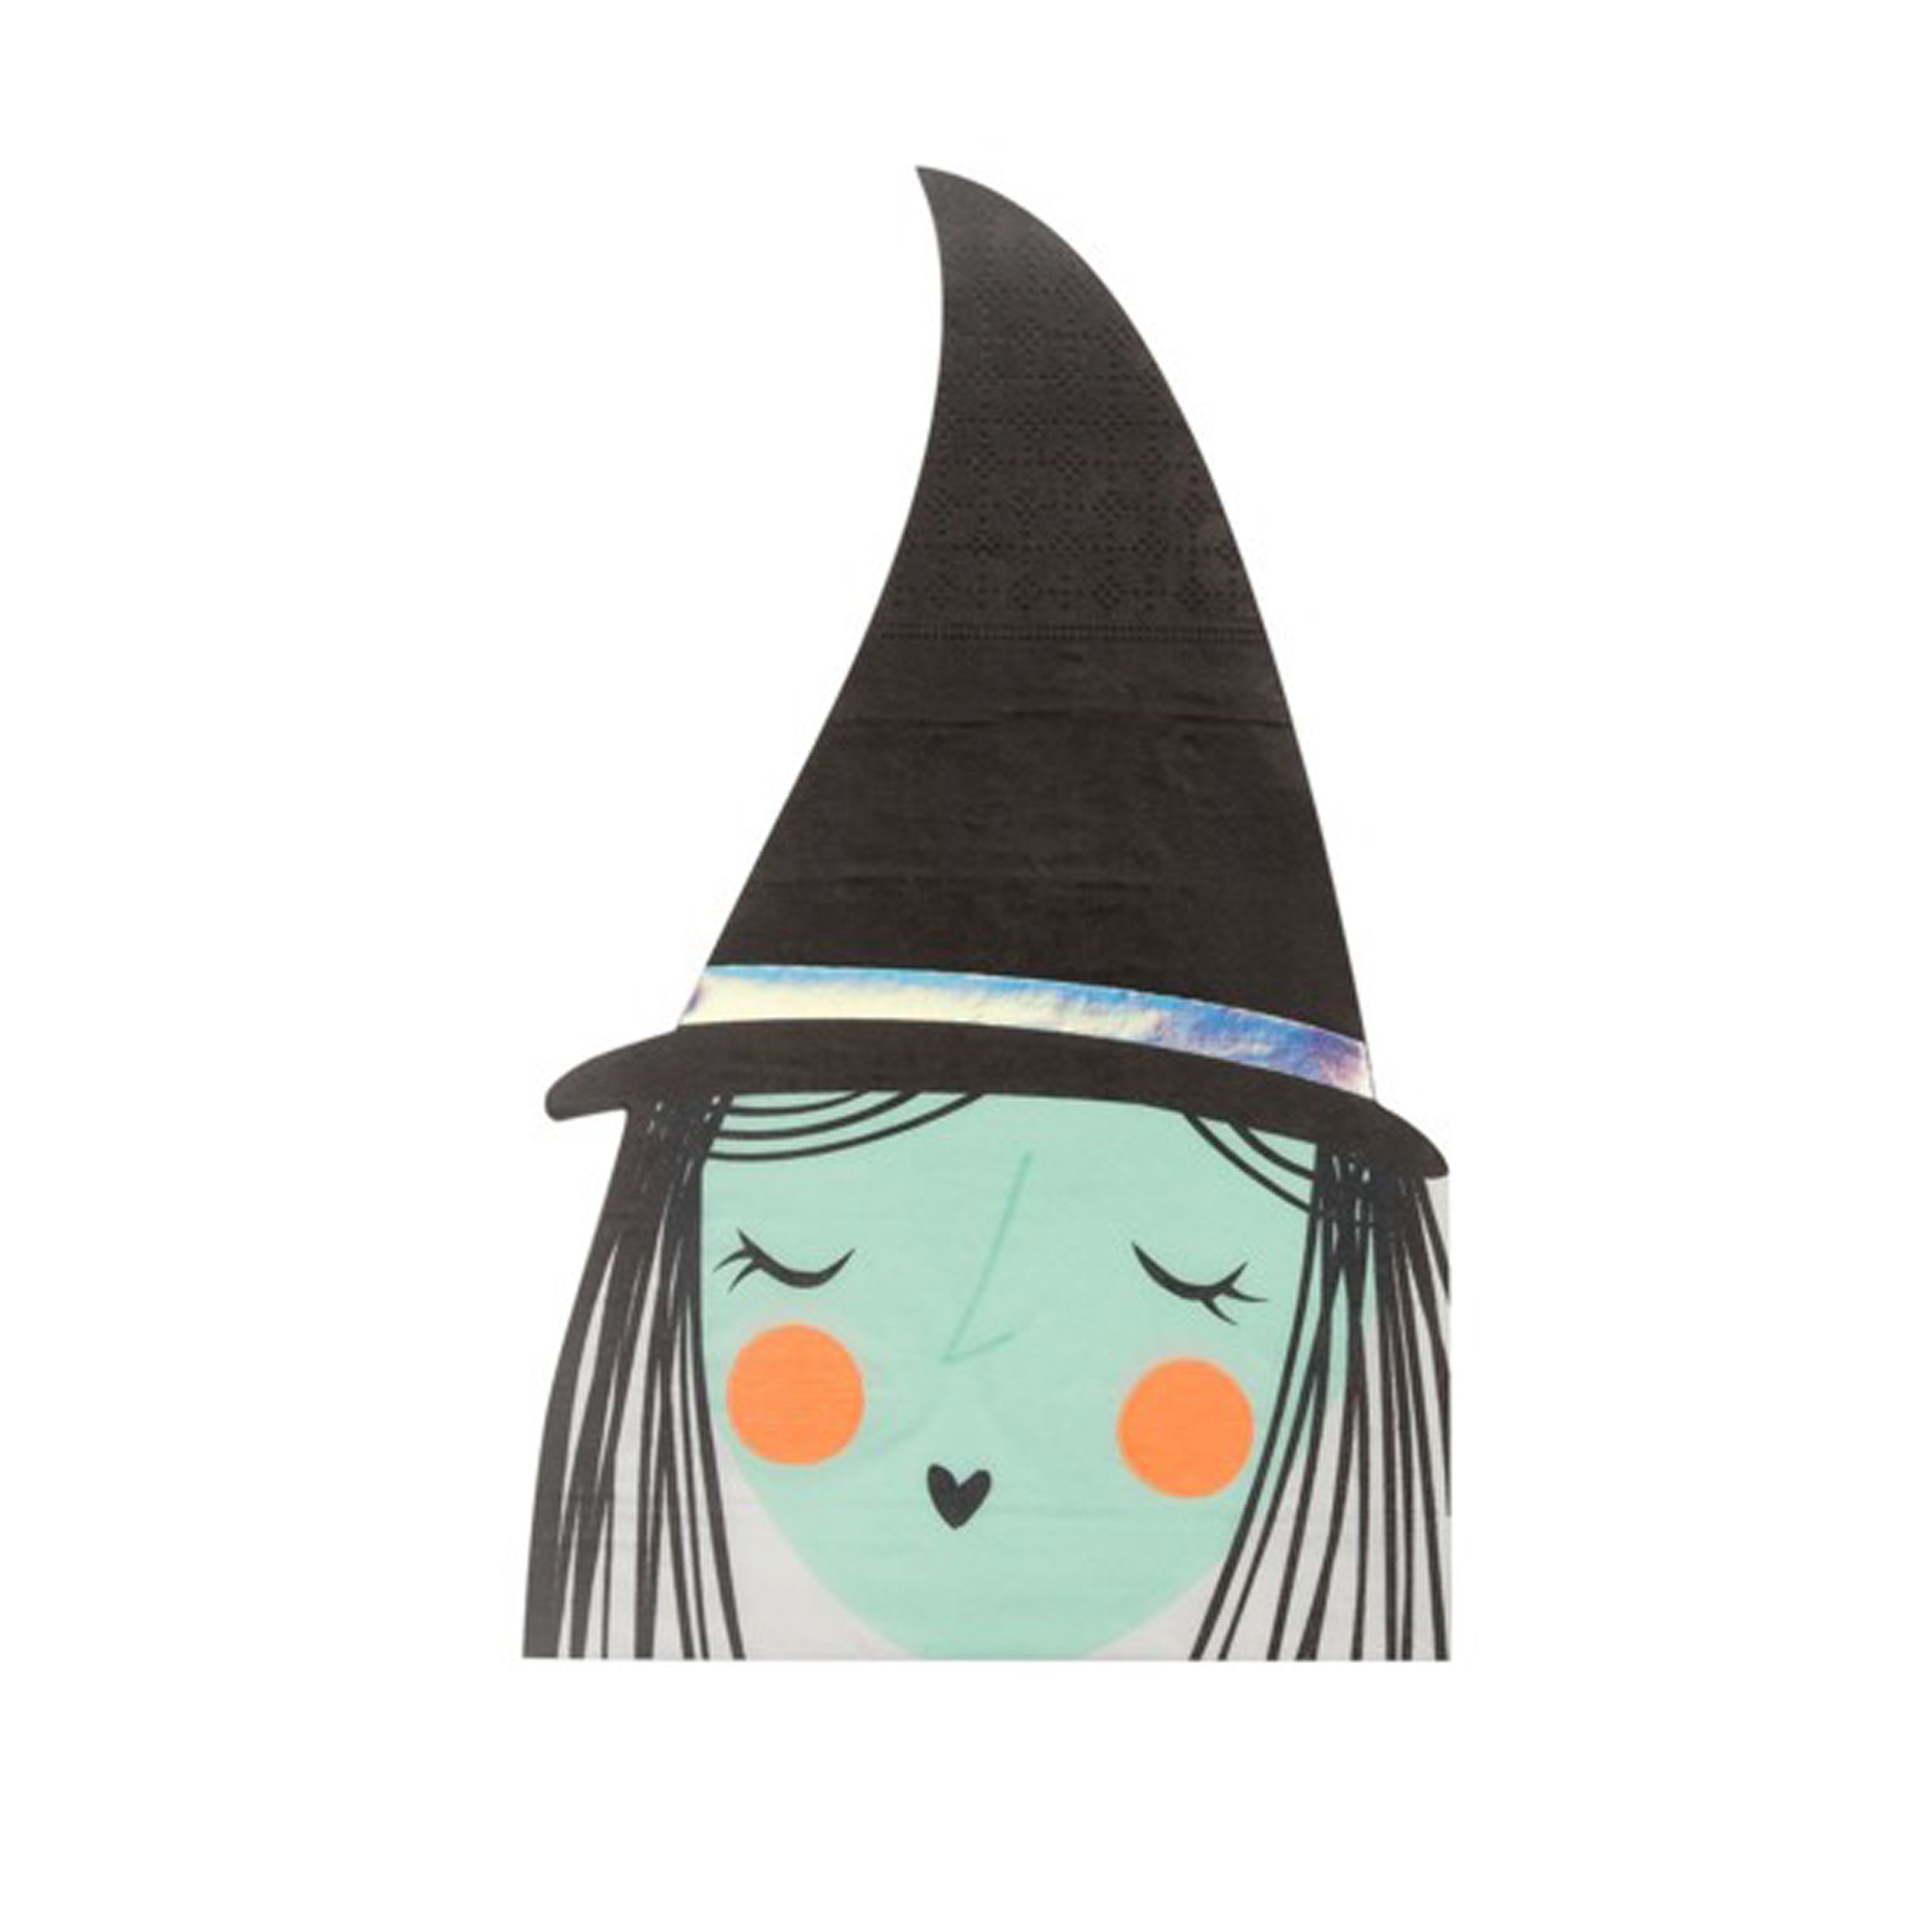 BUY ME / NEW ITEM $8.99 each Witch Paper Napkins - 16 Pack